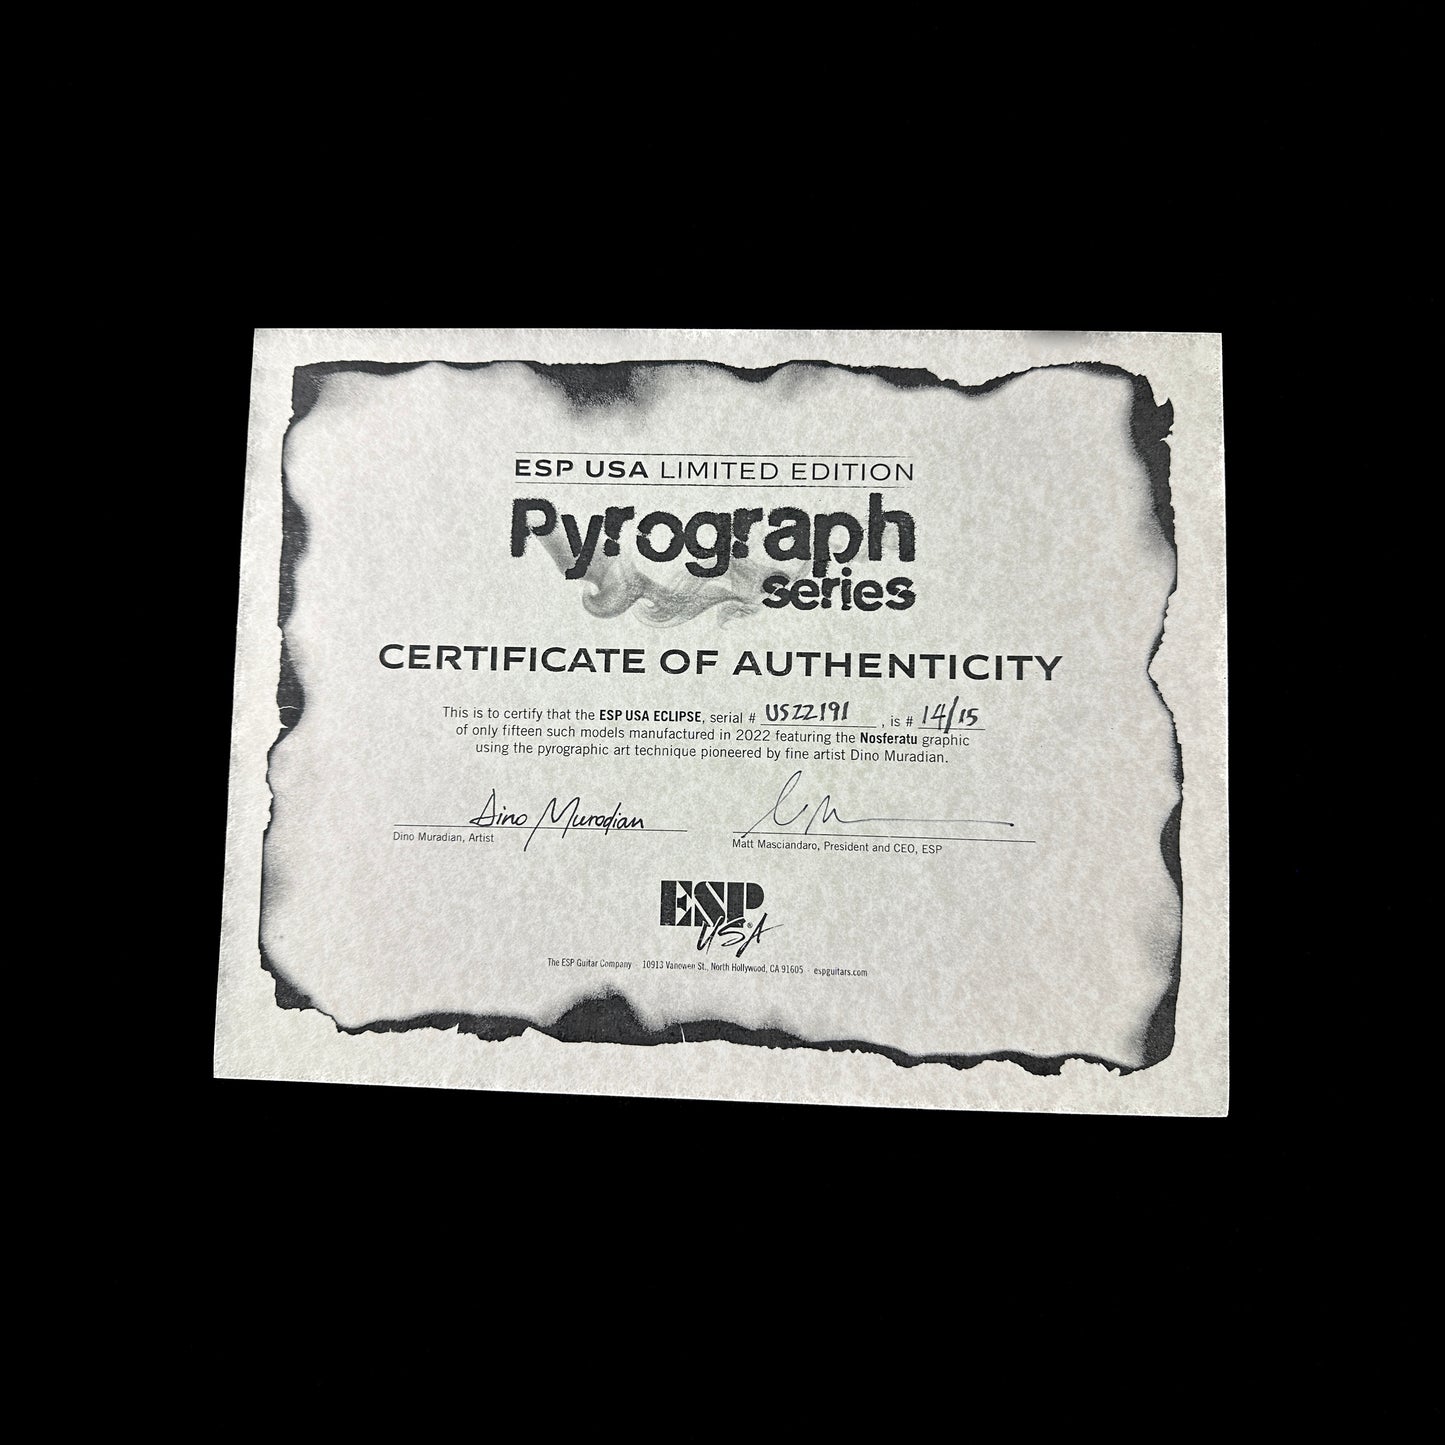 Certificate of authenticity for ESP USA Nosferatu Limited Edition Pyrograph Series.